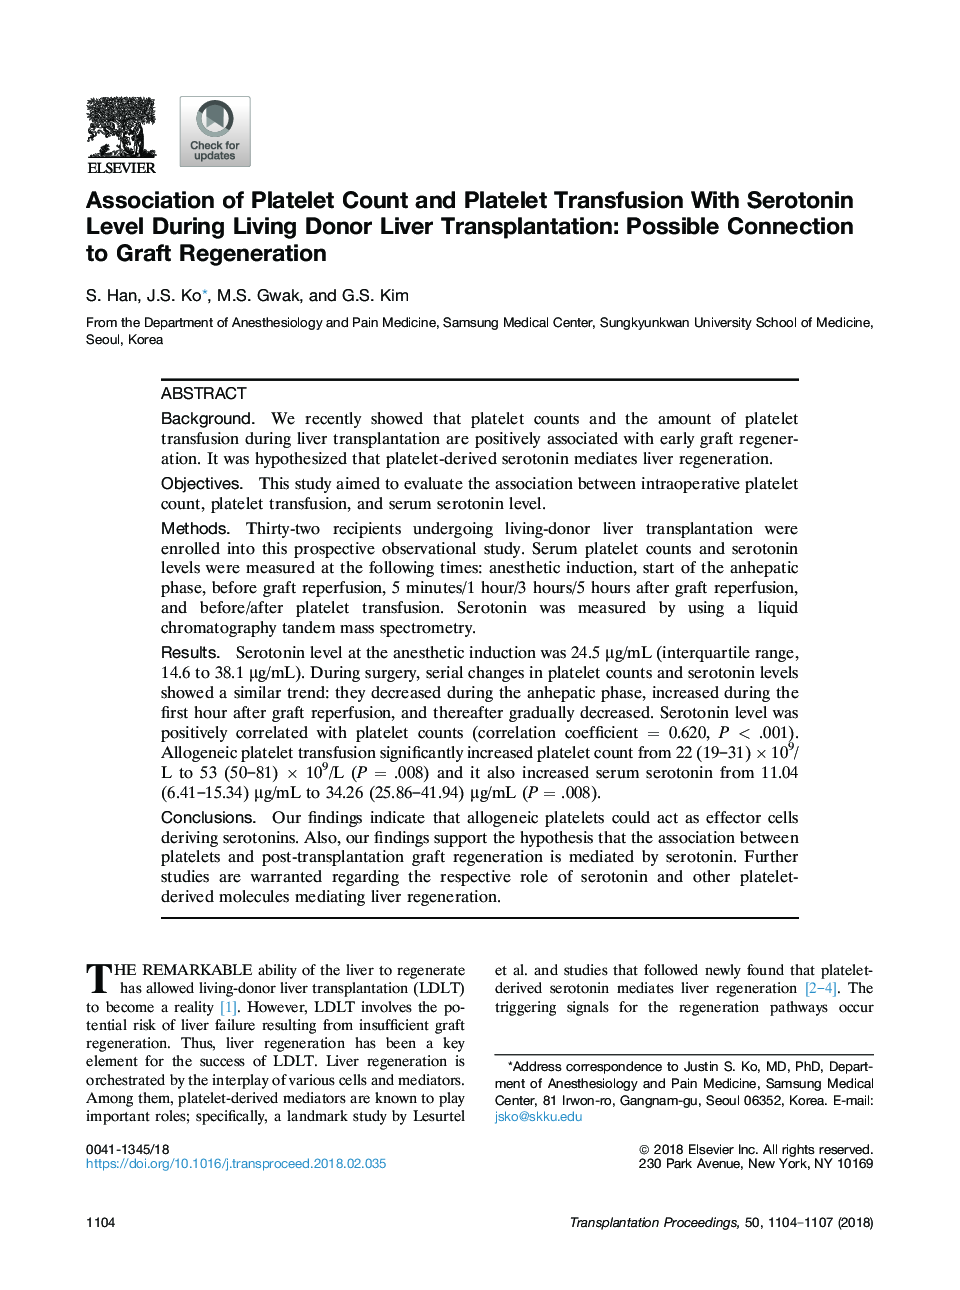 Association of Platelet Count and Platelet Transfusion With Serotonin Level During Living Donor Liver Transplantation: Possible Connection to Graft Regeneration